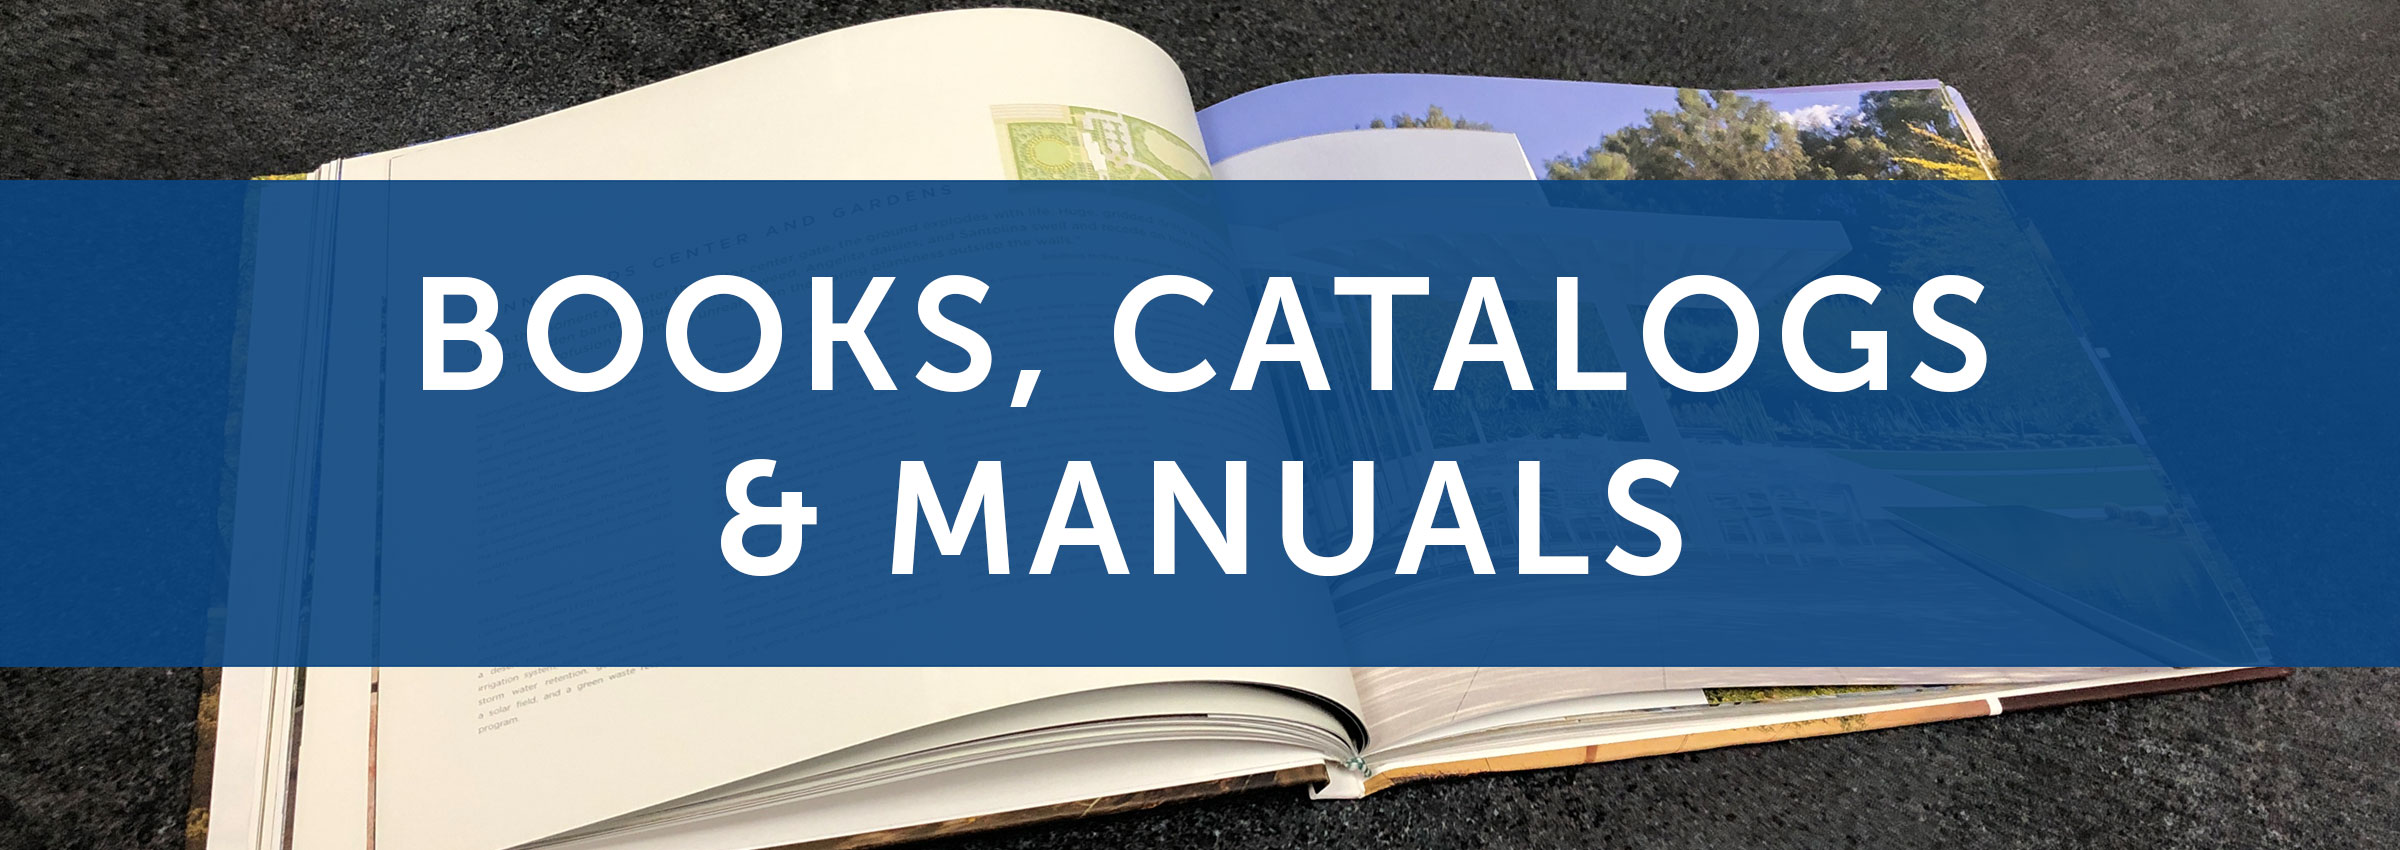 Books, Catalogs and Manuals